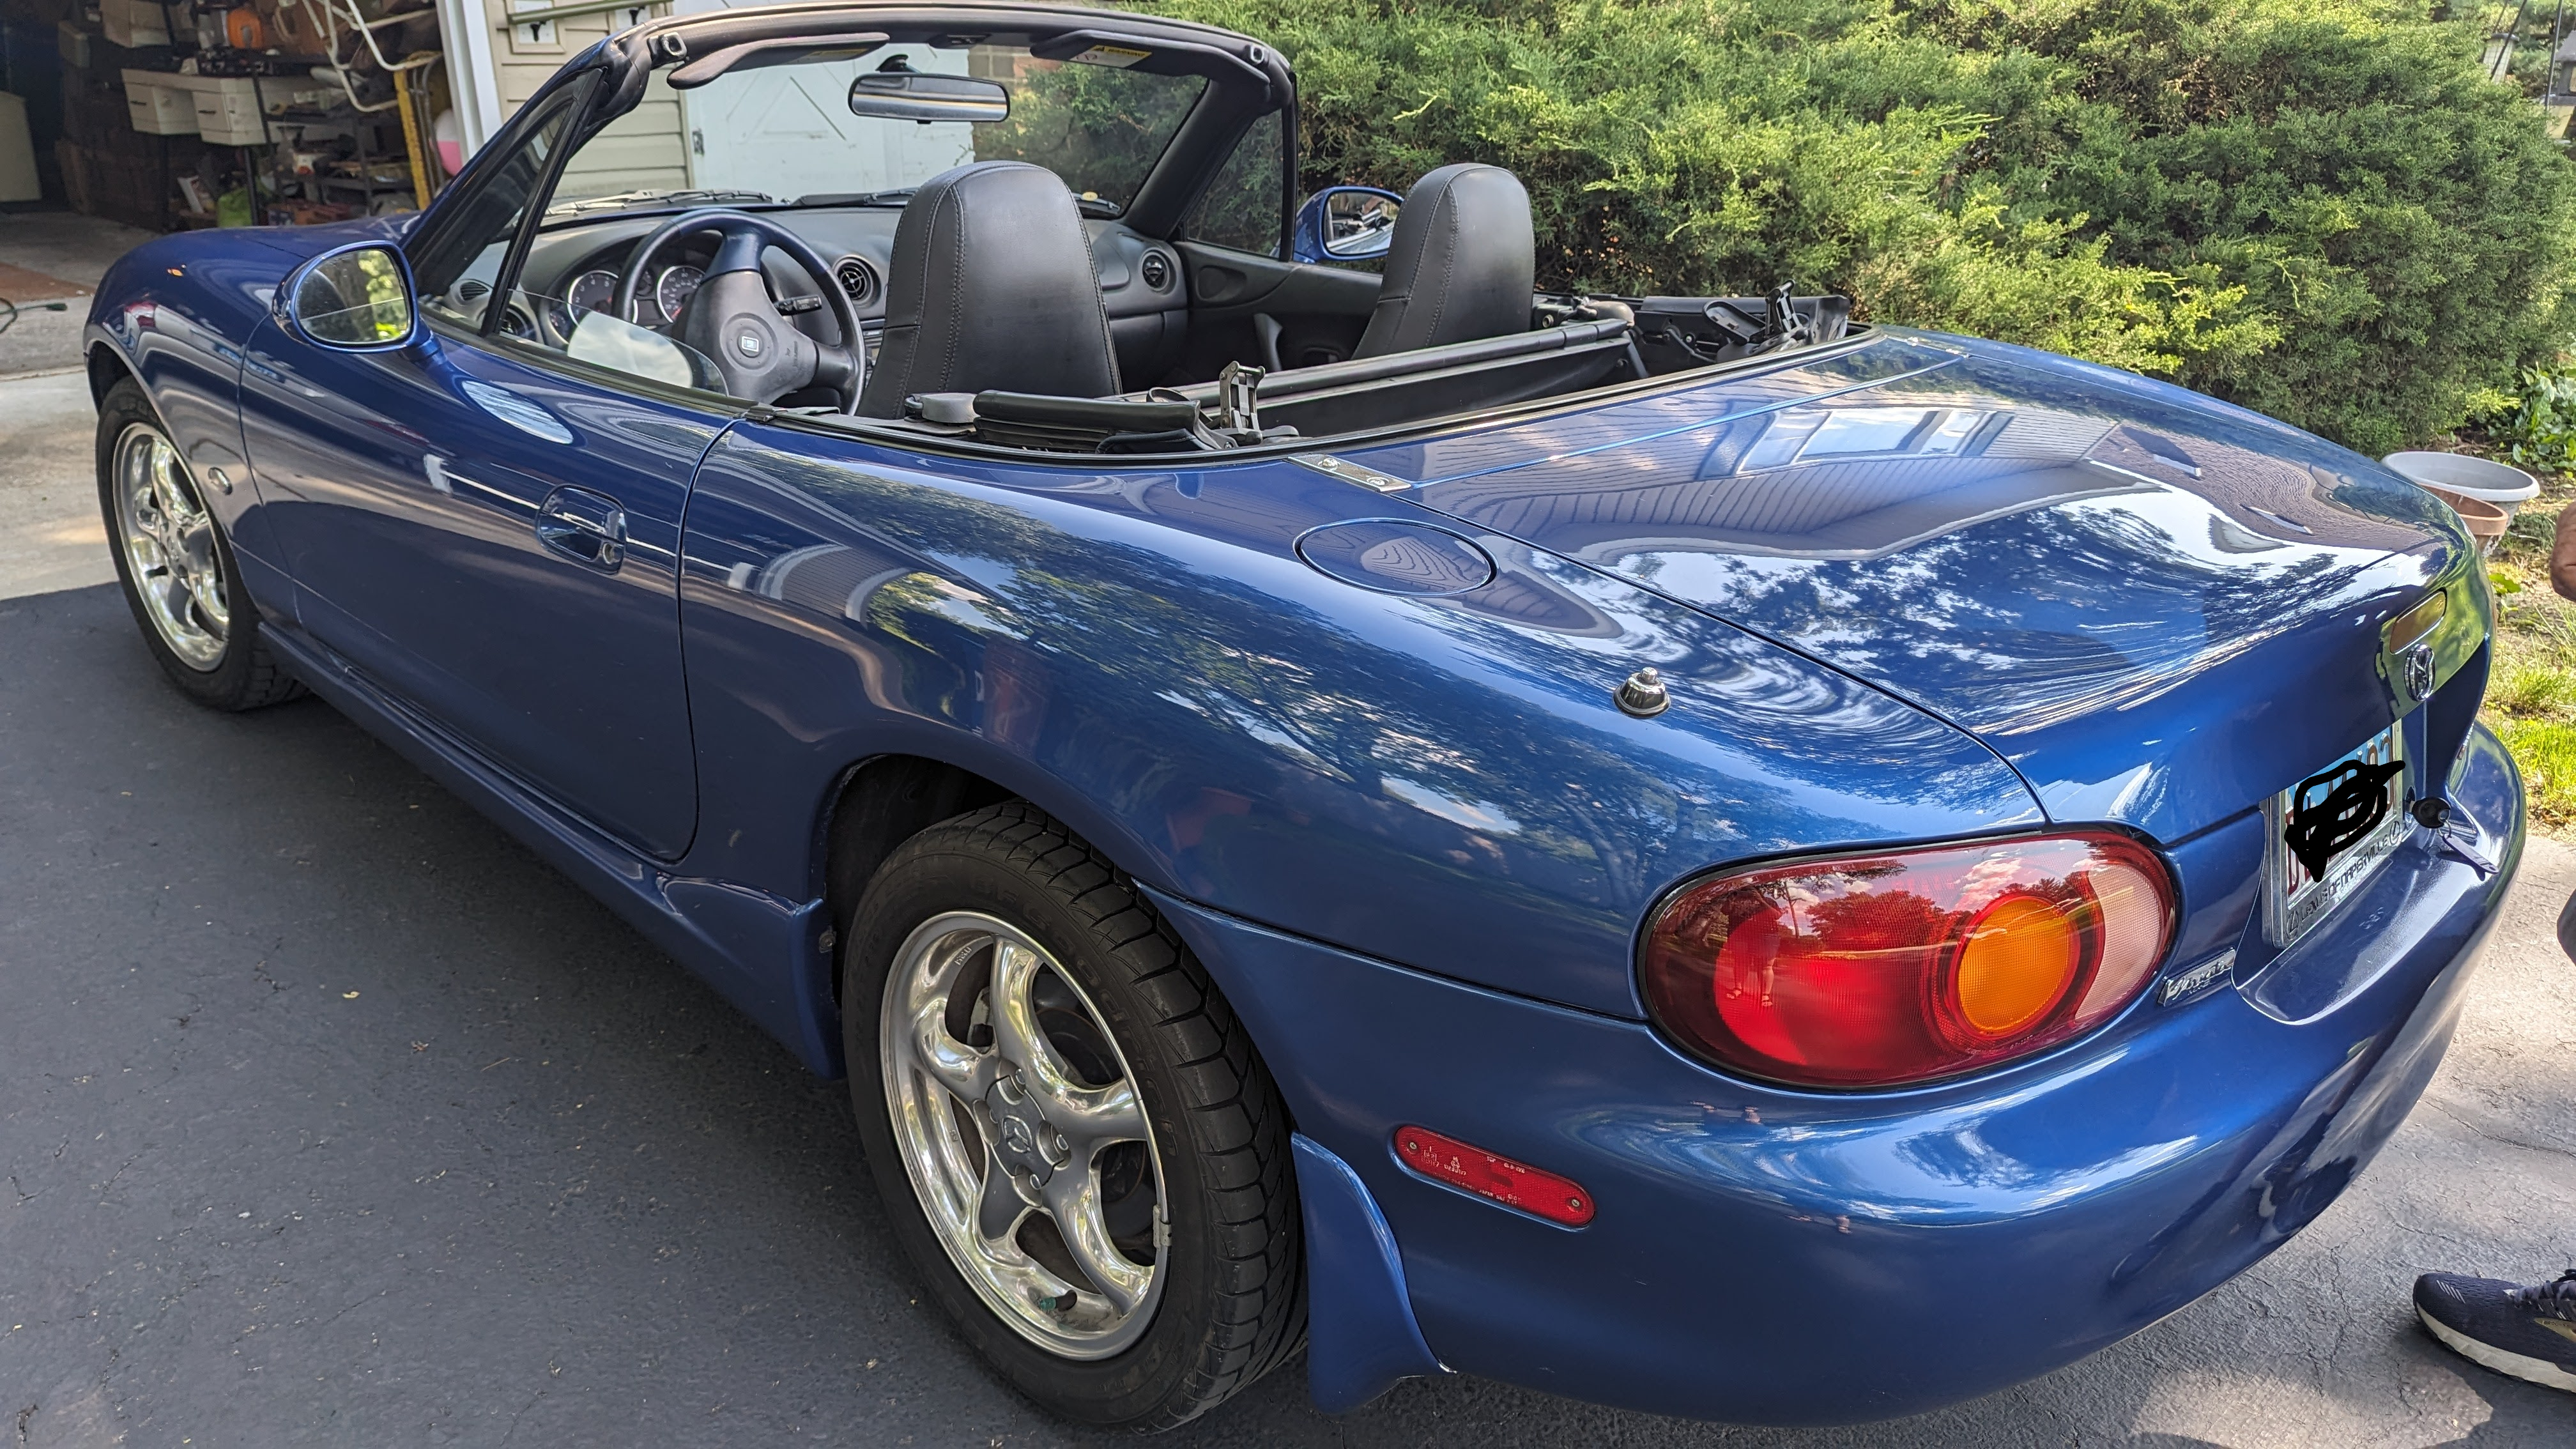 You Can Get a Used ND Mazda Miata for Less Than $15,000 - Autotrader